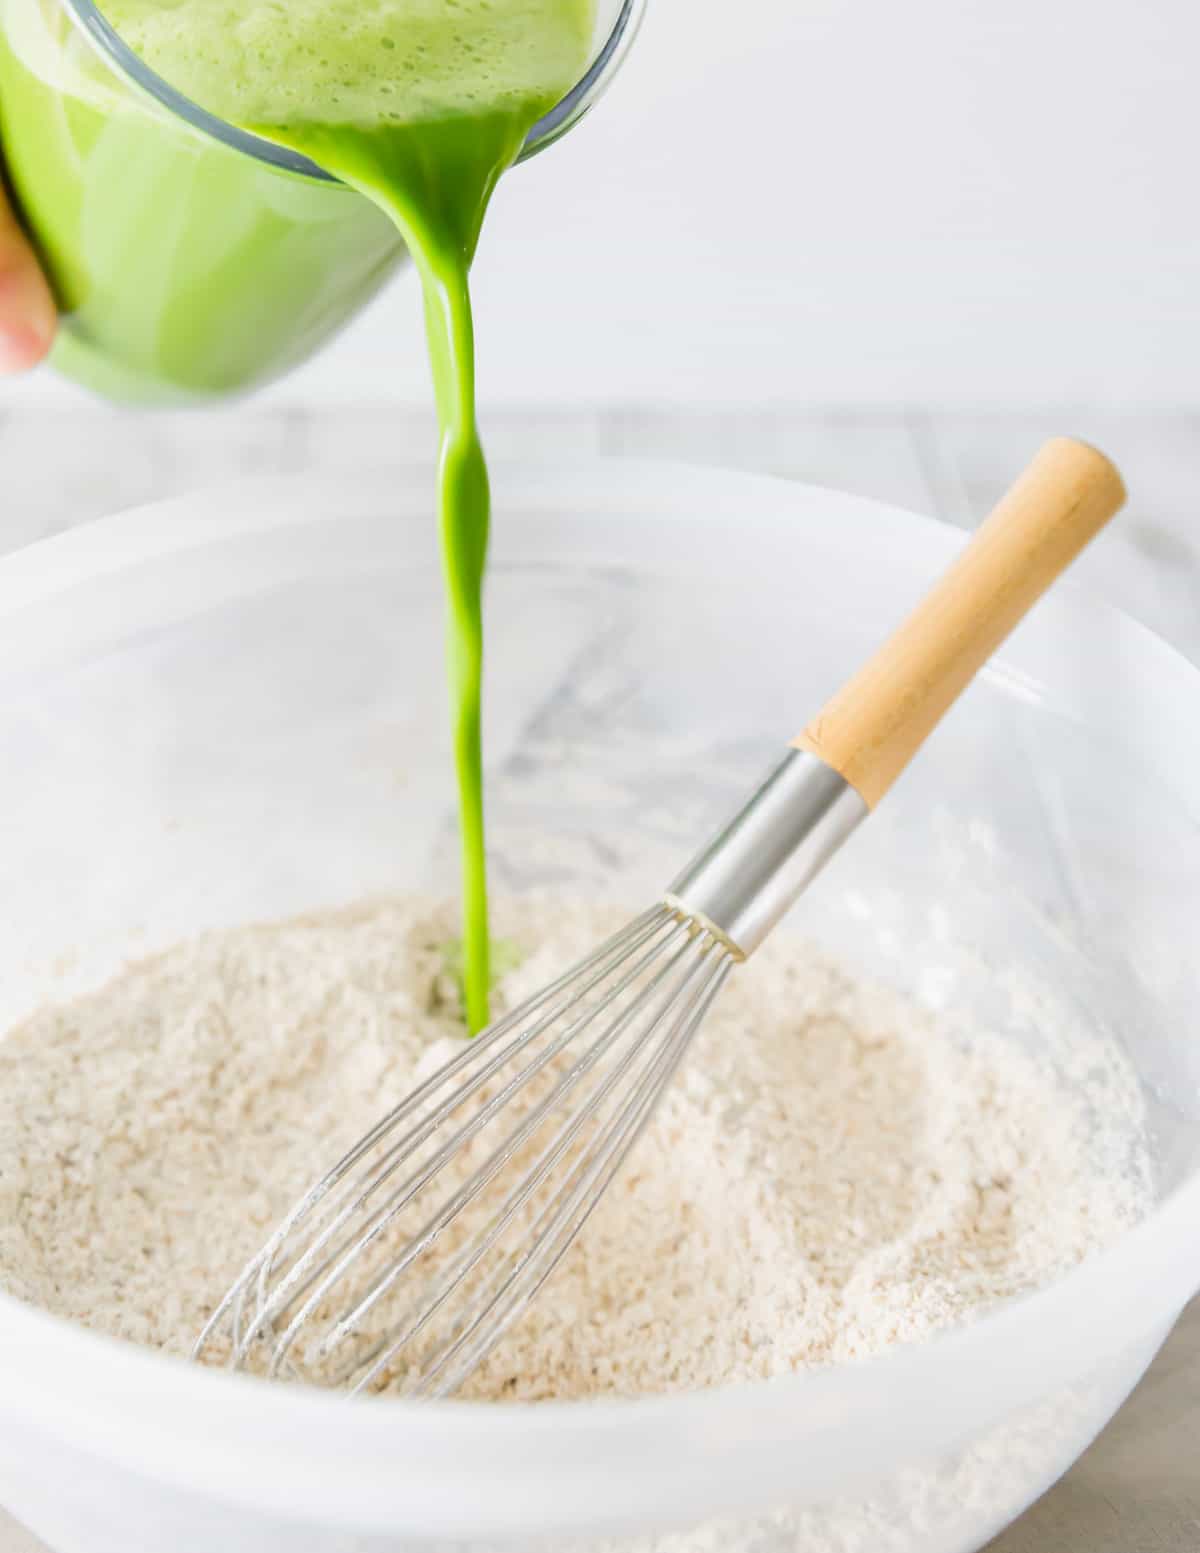 The spinach almond milk blended mixture with maple syrup, vanilla and avocado oil is poured into the dry ingredients to make green pancakes.